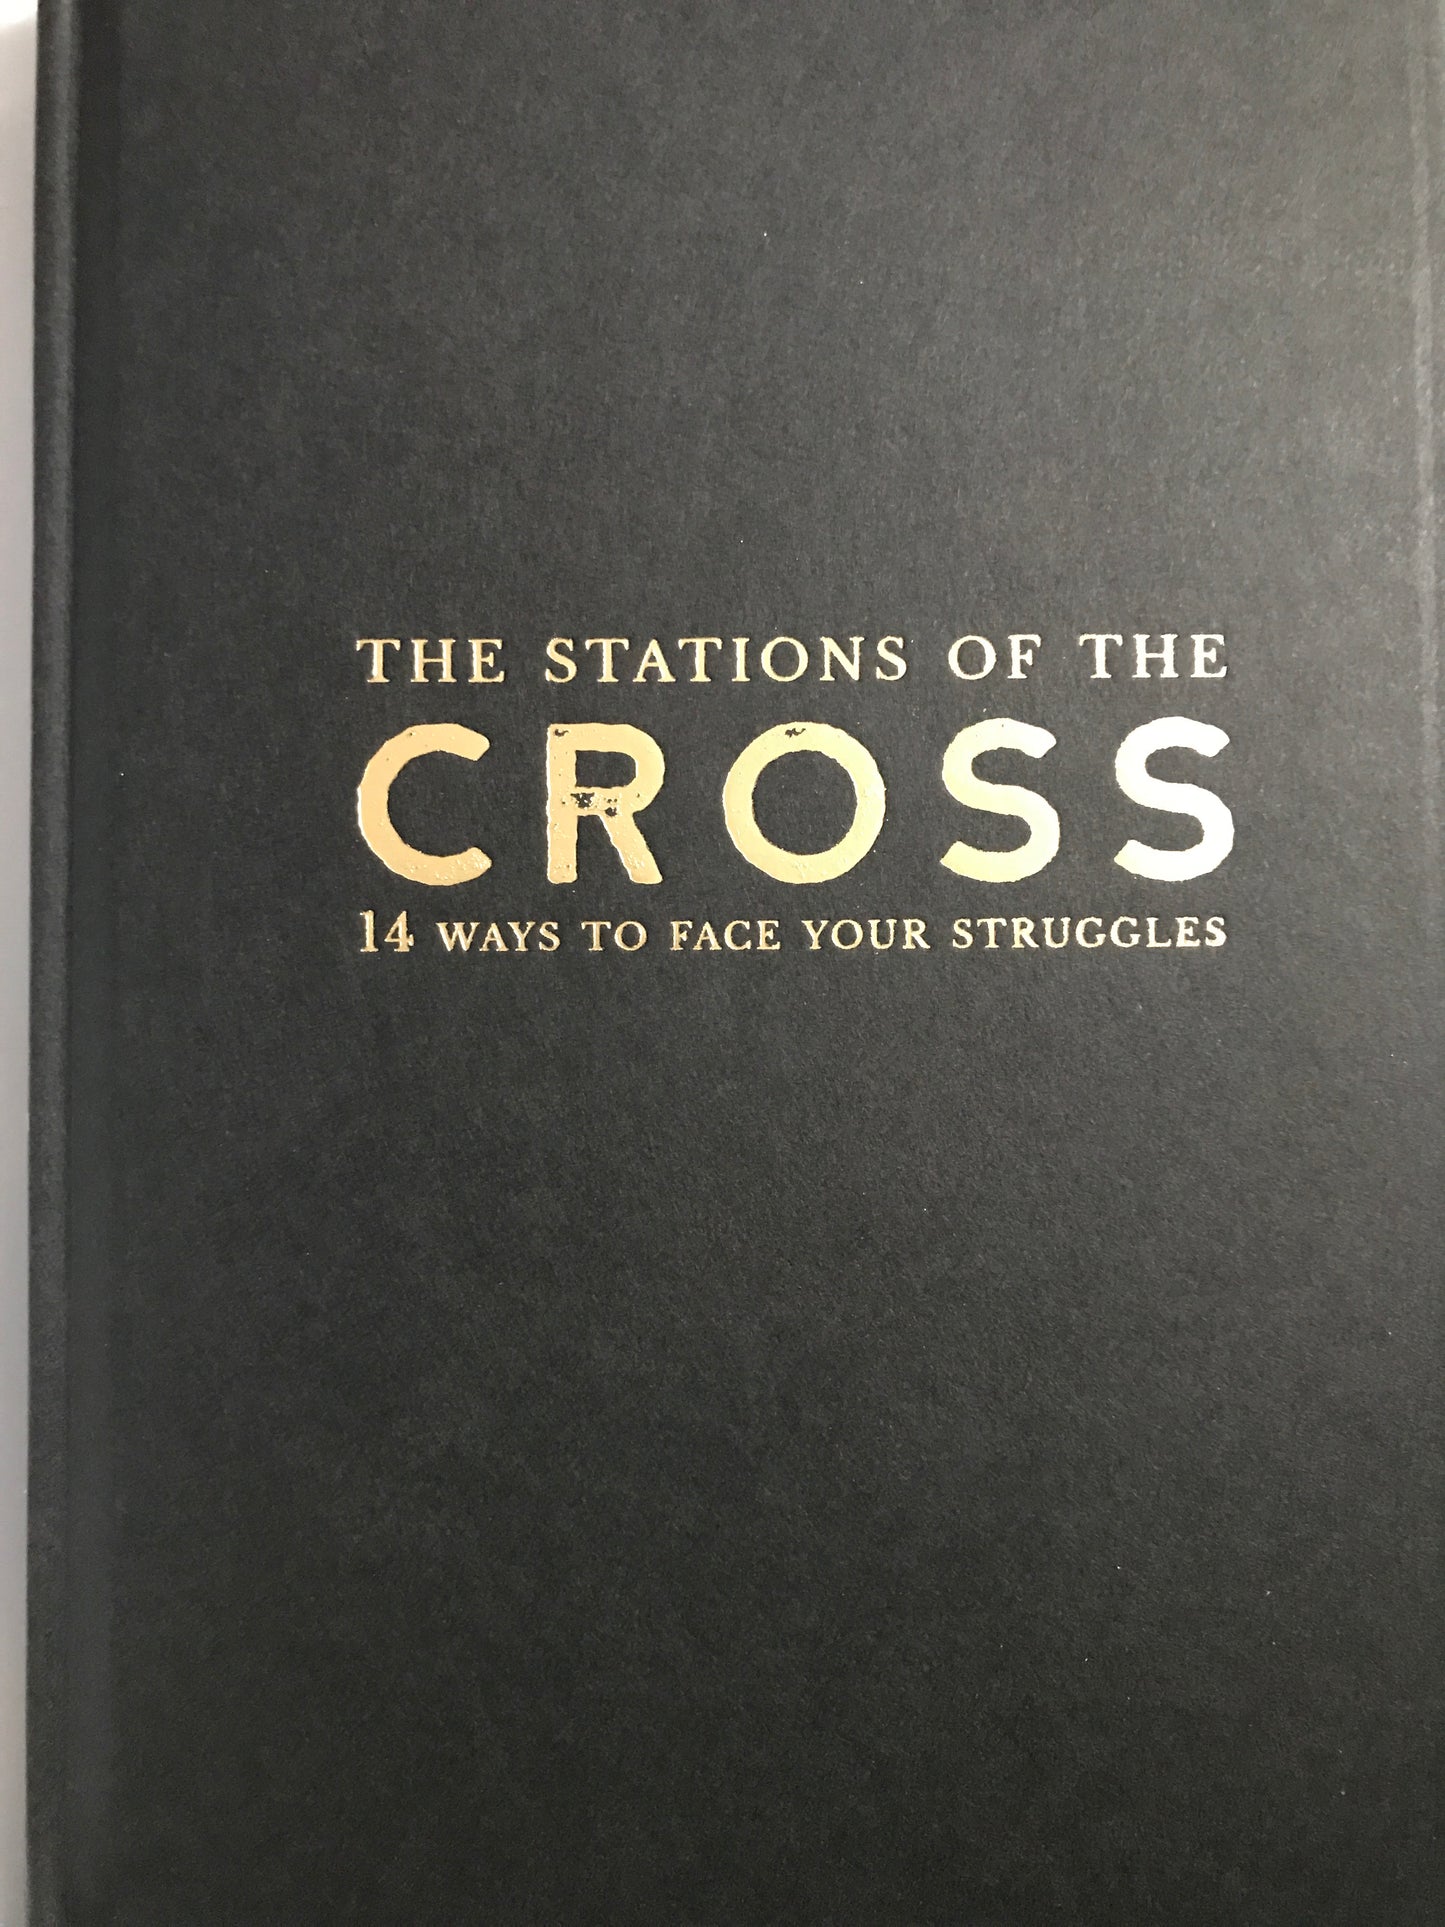 The Stations of the Cross Book by Immaculee